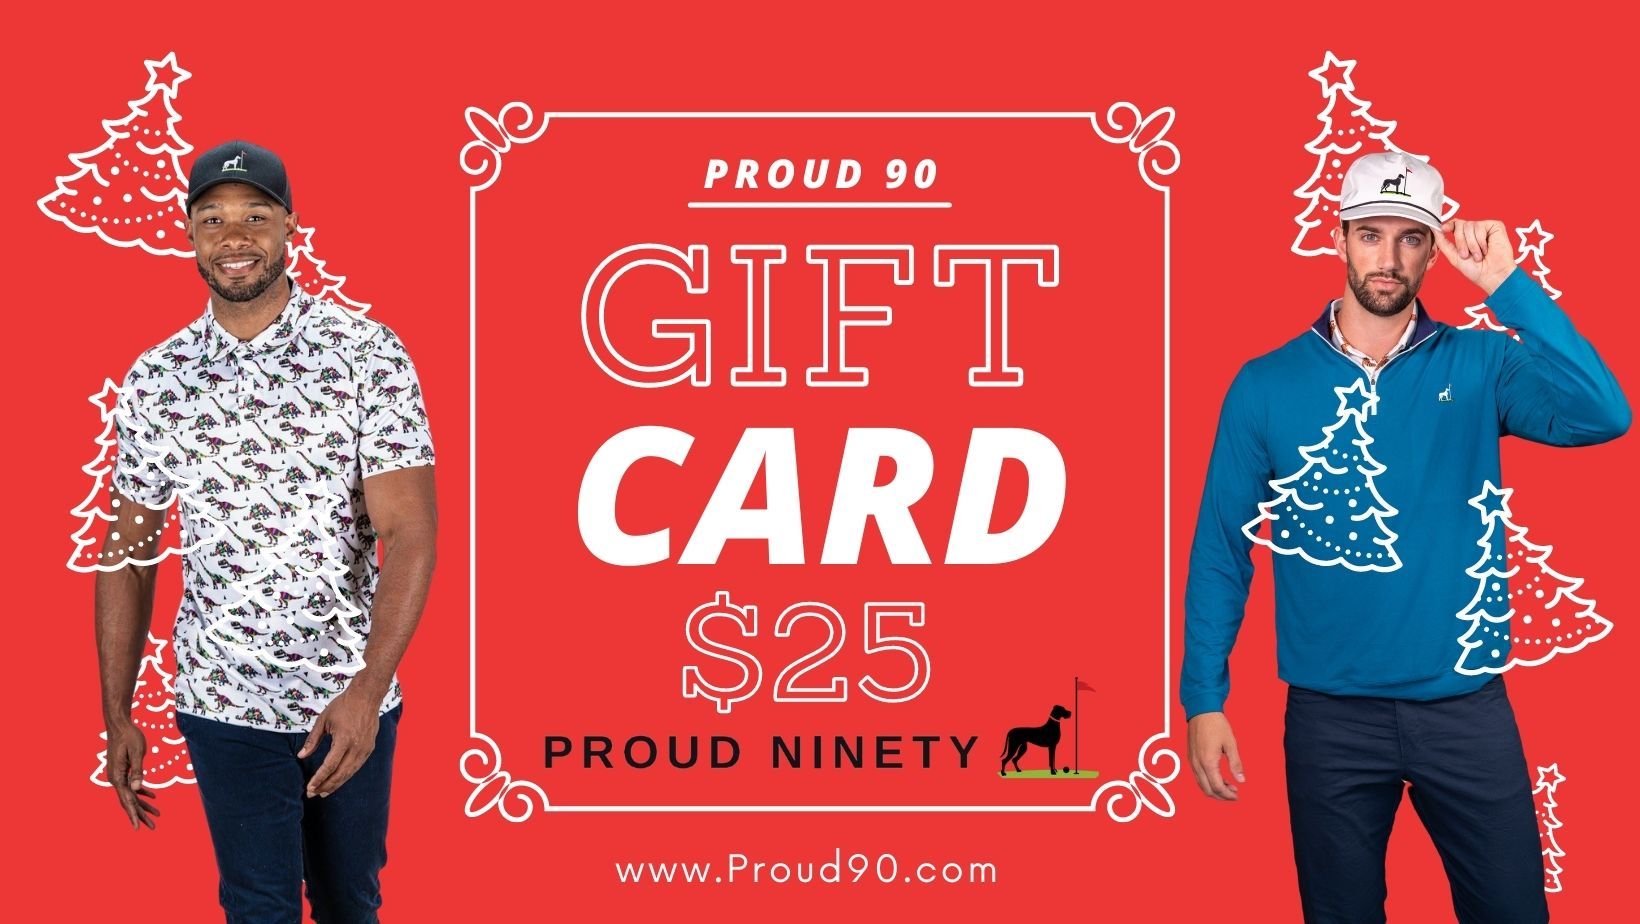 Proud 90 Gift Card Gift Cards Proud 90 $25 